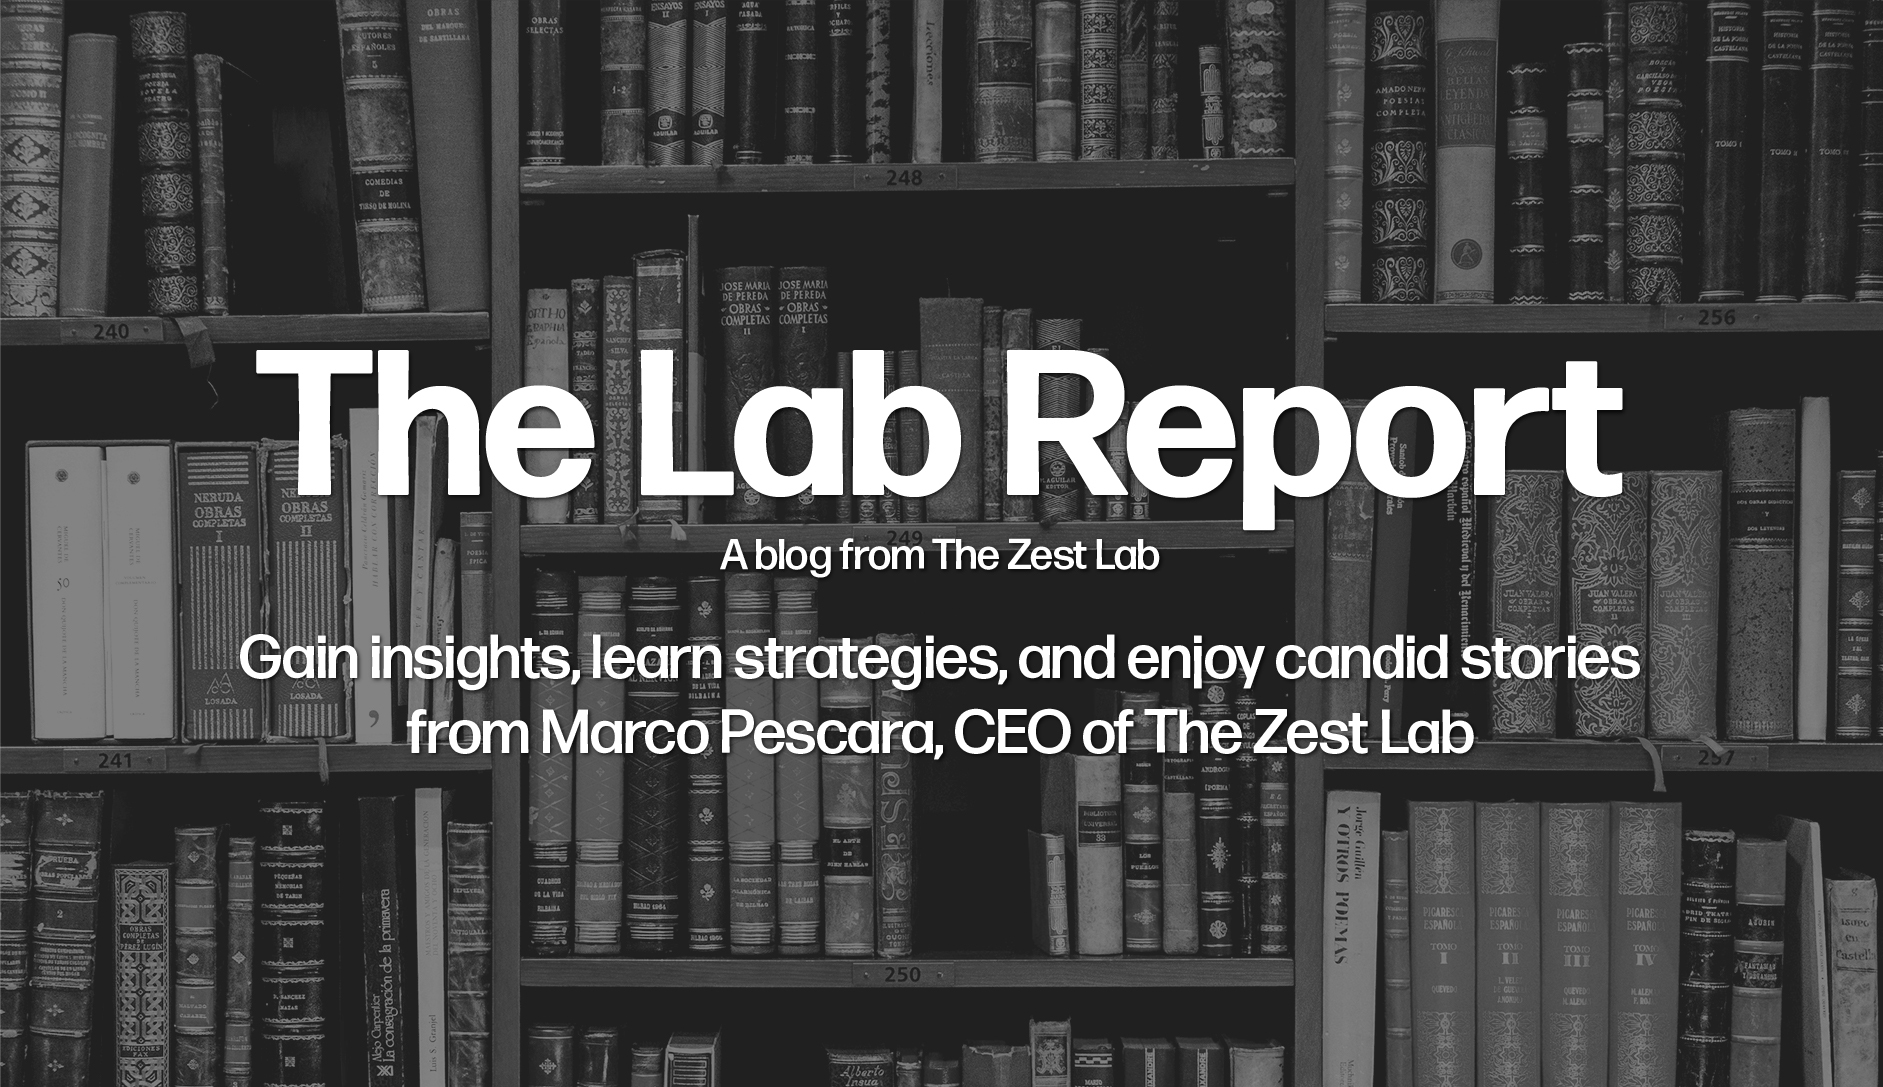 THE LAB REPORT: A blog from The Zest Lab